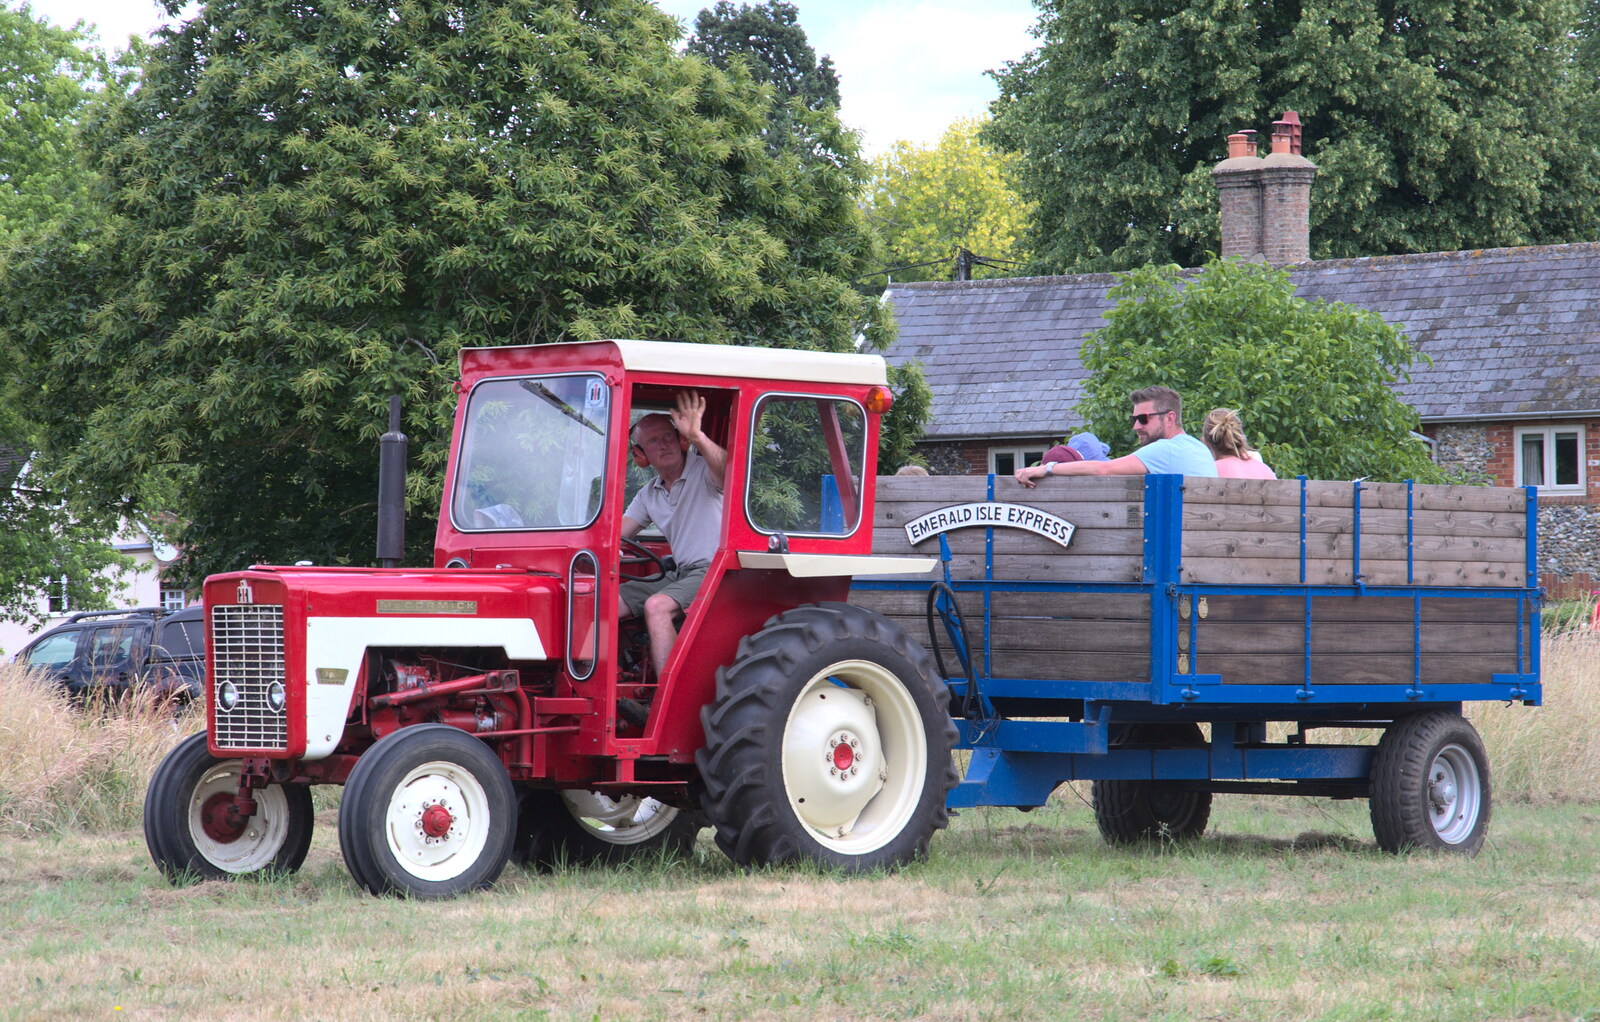 The first of the vintage tractors appears from A Village Hog Roast, Little Green, Thrandeston, Suffolk - 24th June 2018